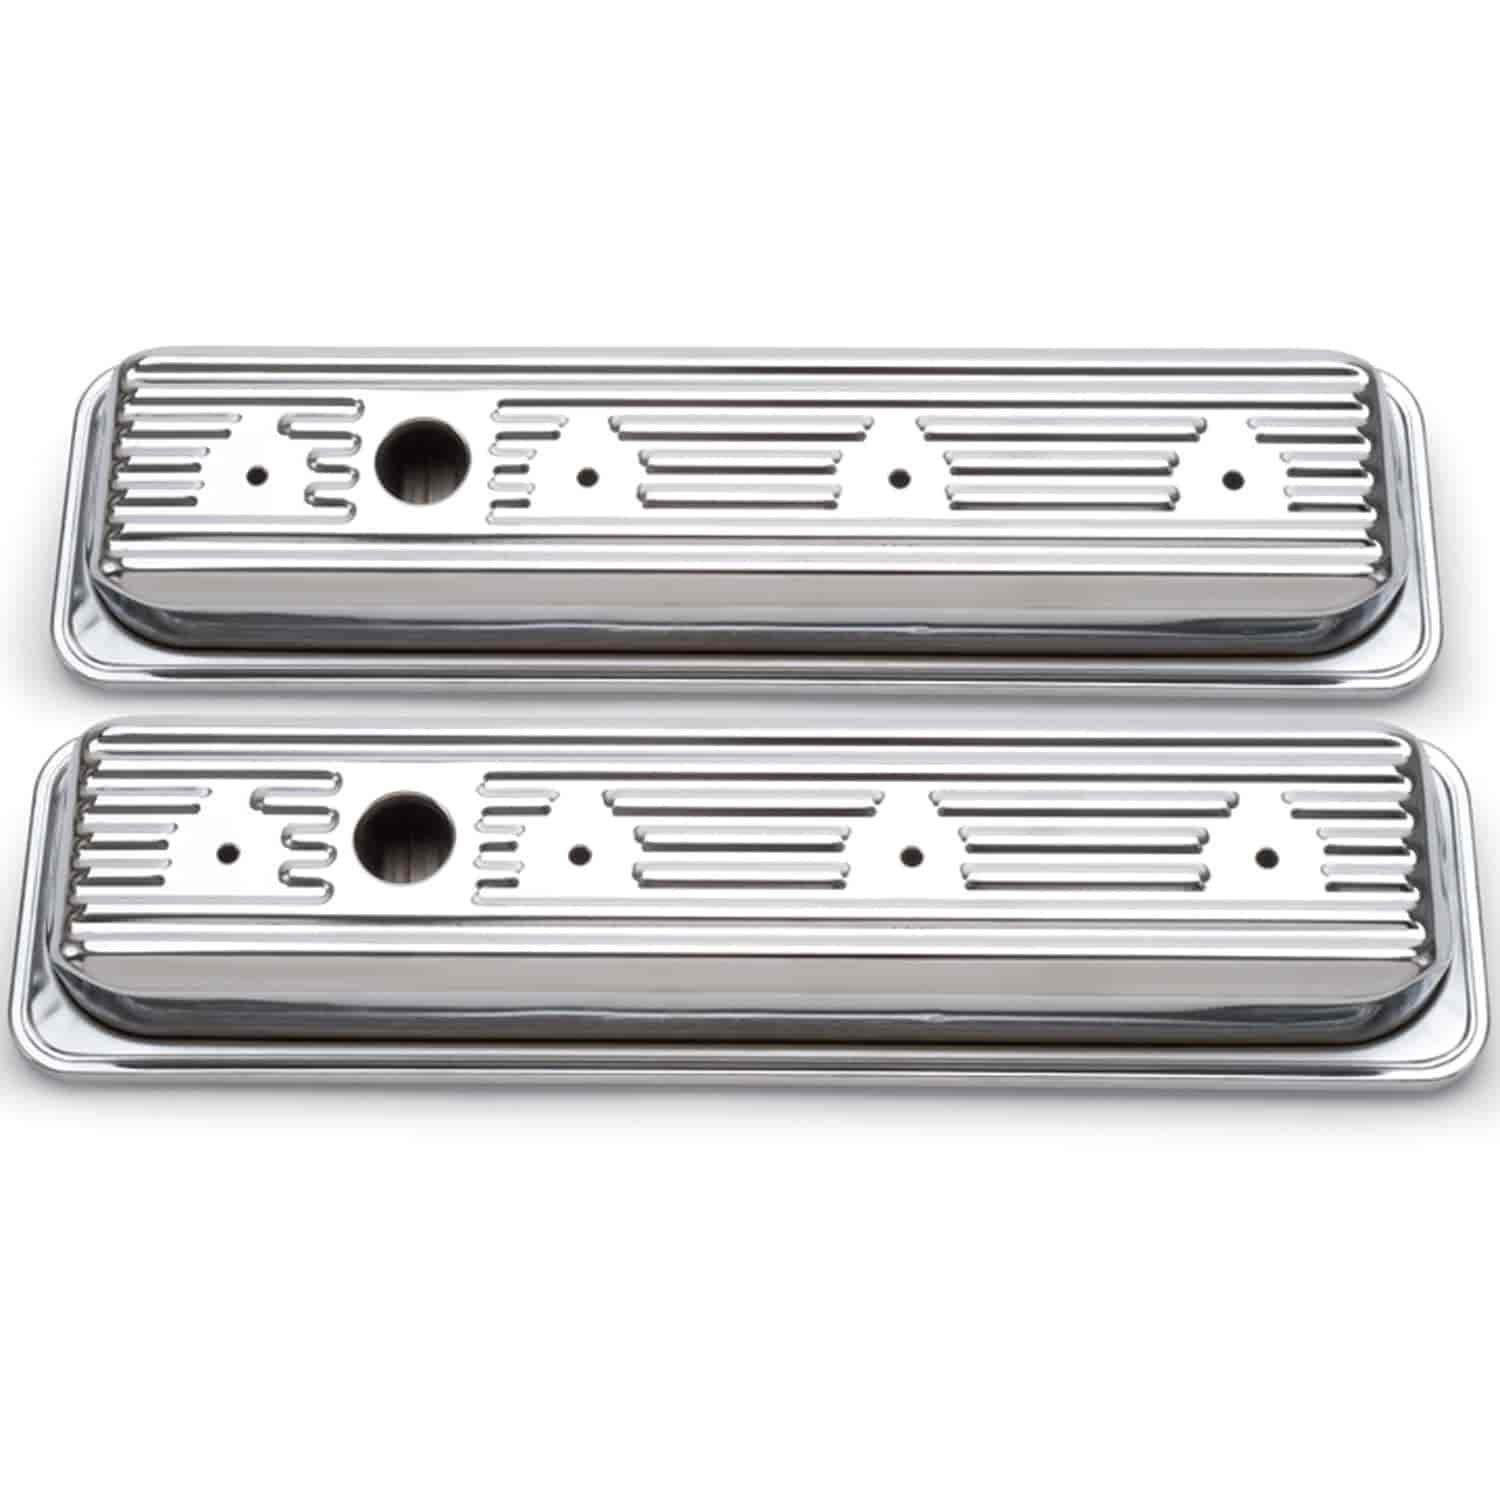 Signature Series Valve Covers 1987-1995 Small Block Chevy